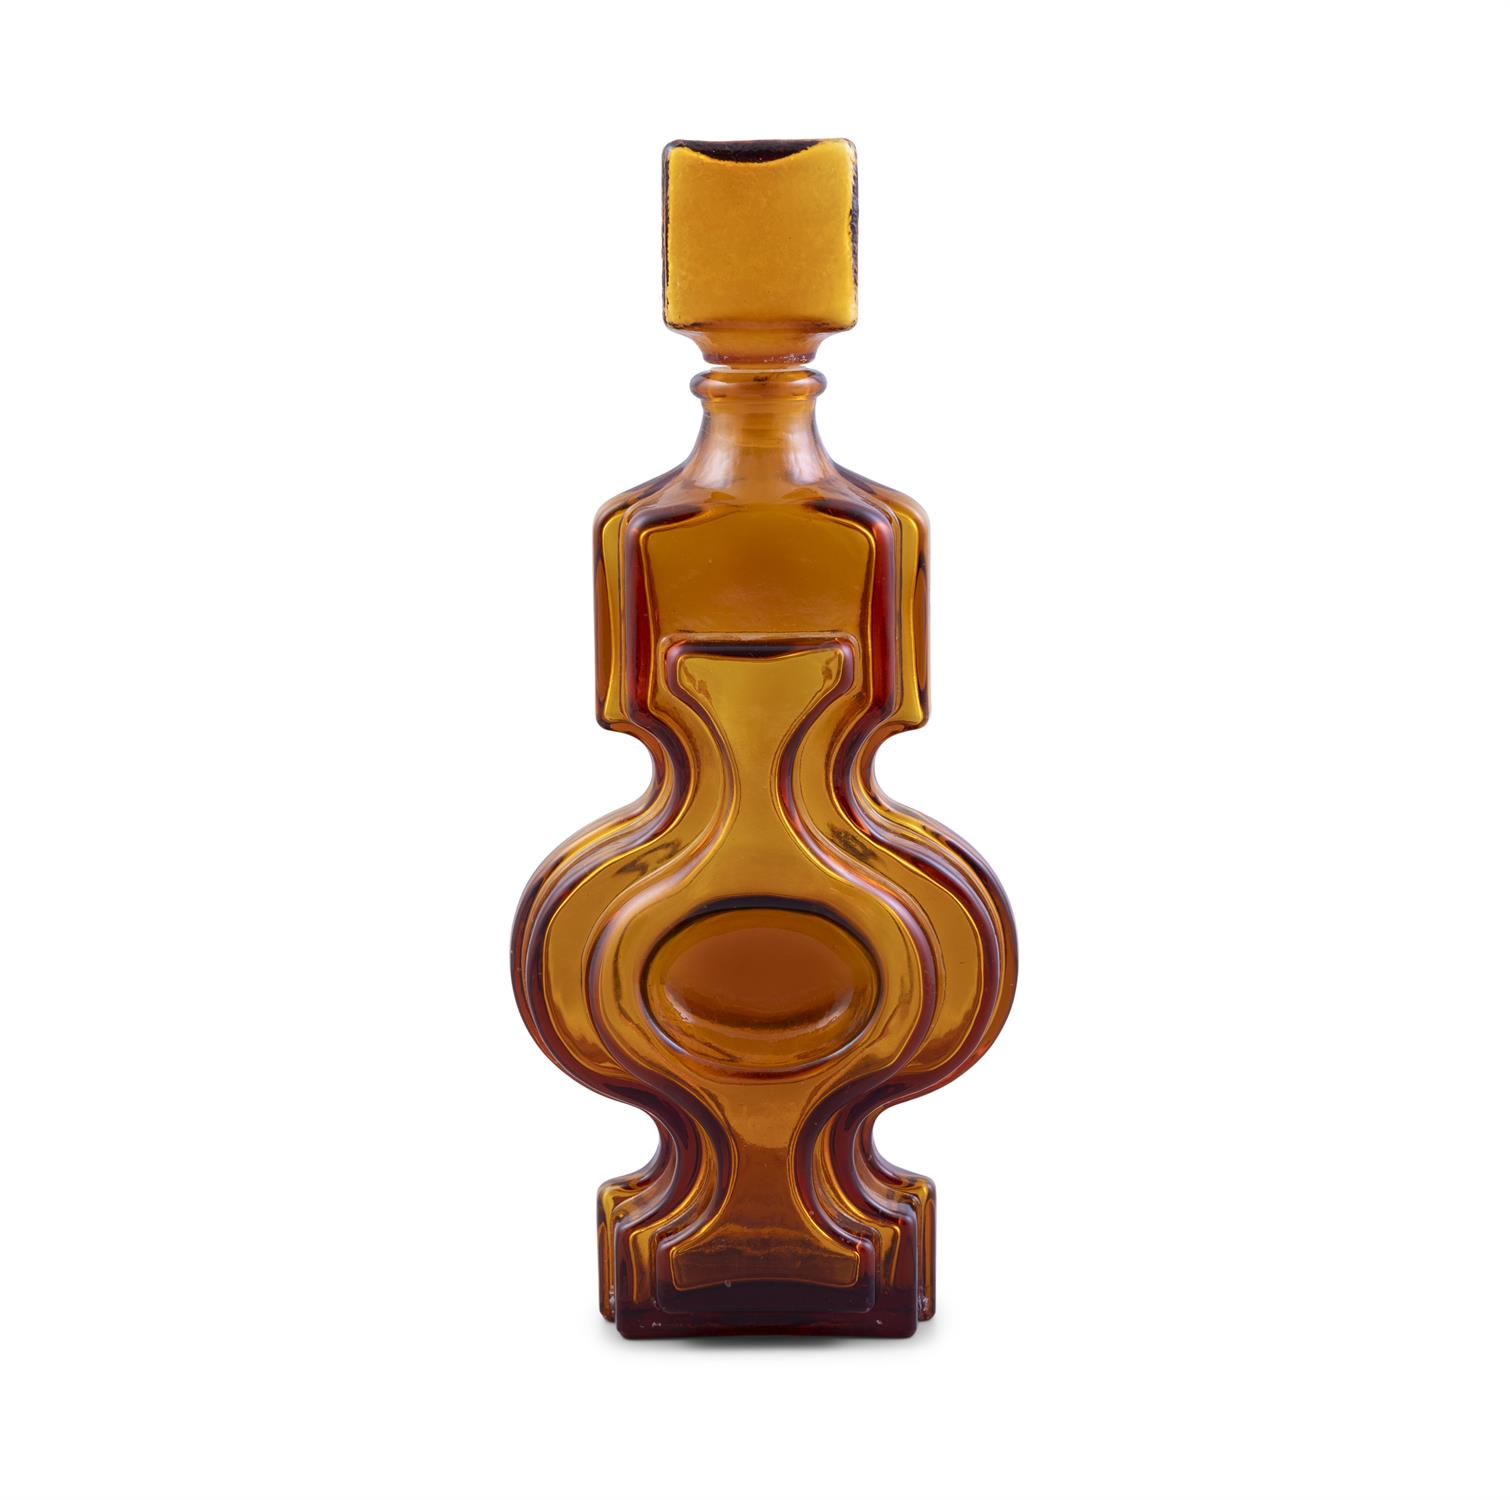 GLASS BOTTLE An orange glass bottle with stopper. Italy, 31cm(h) - Image 2 of 4